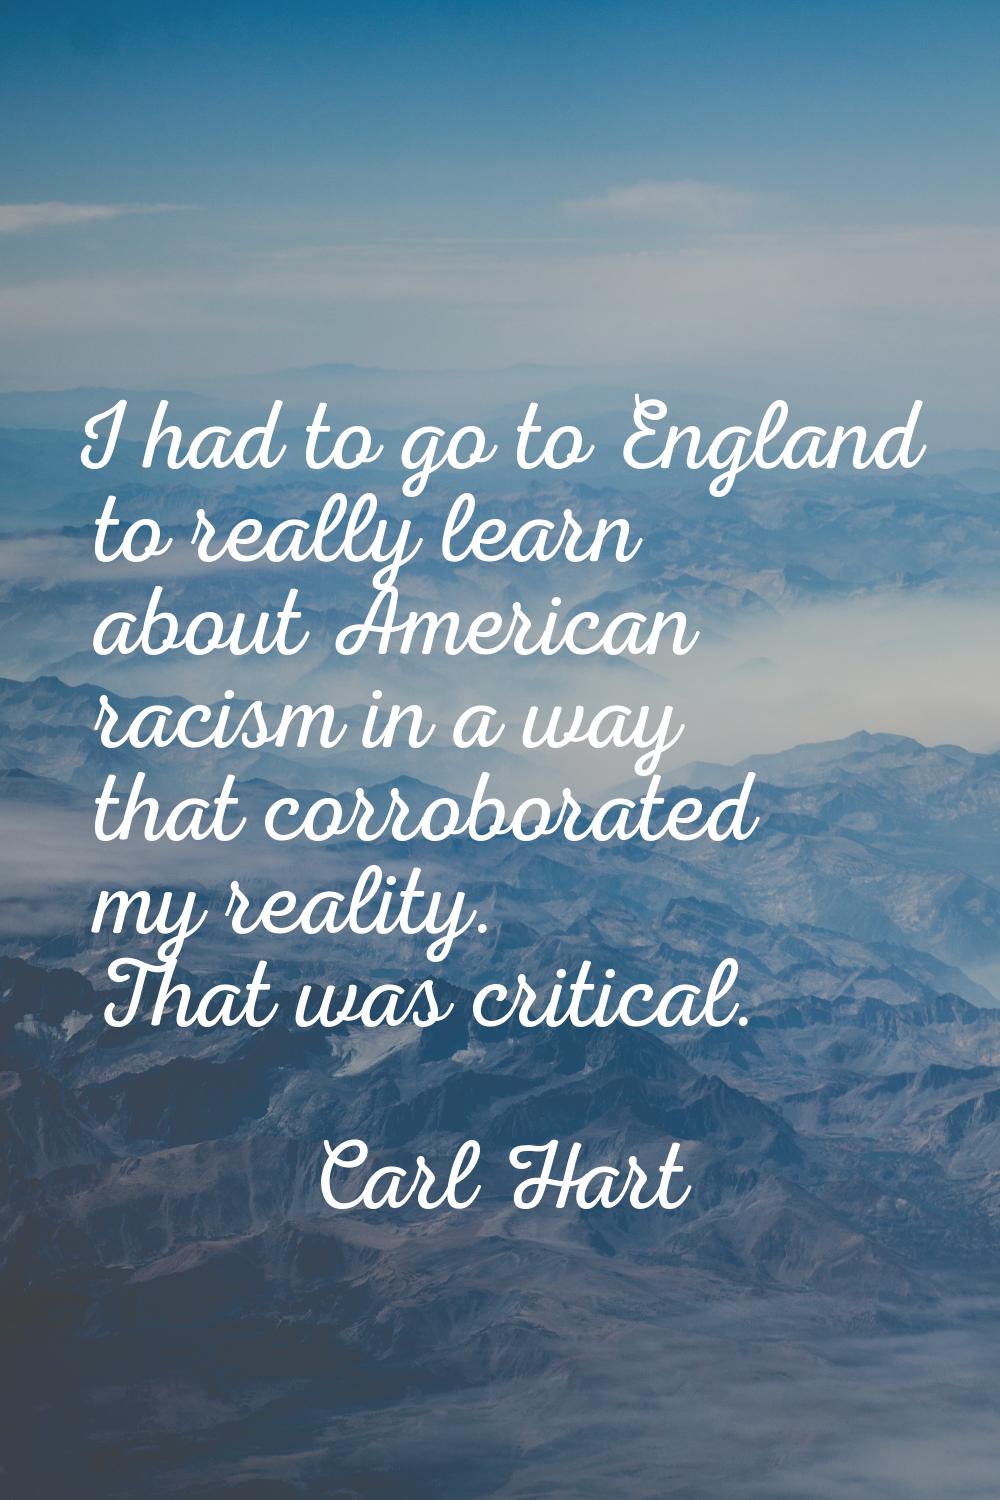 I had to go to England to really learn about American racism in a way that corroborated my reality.